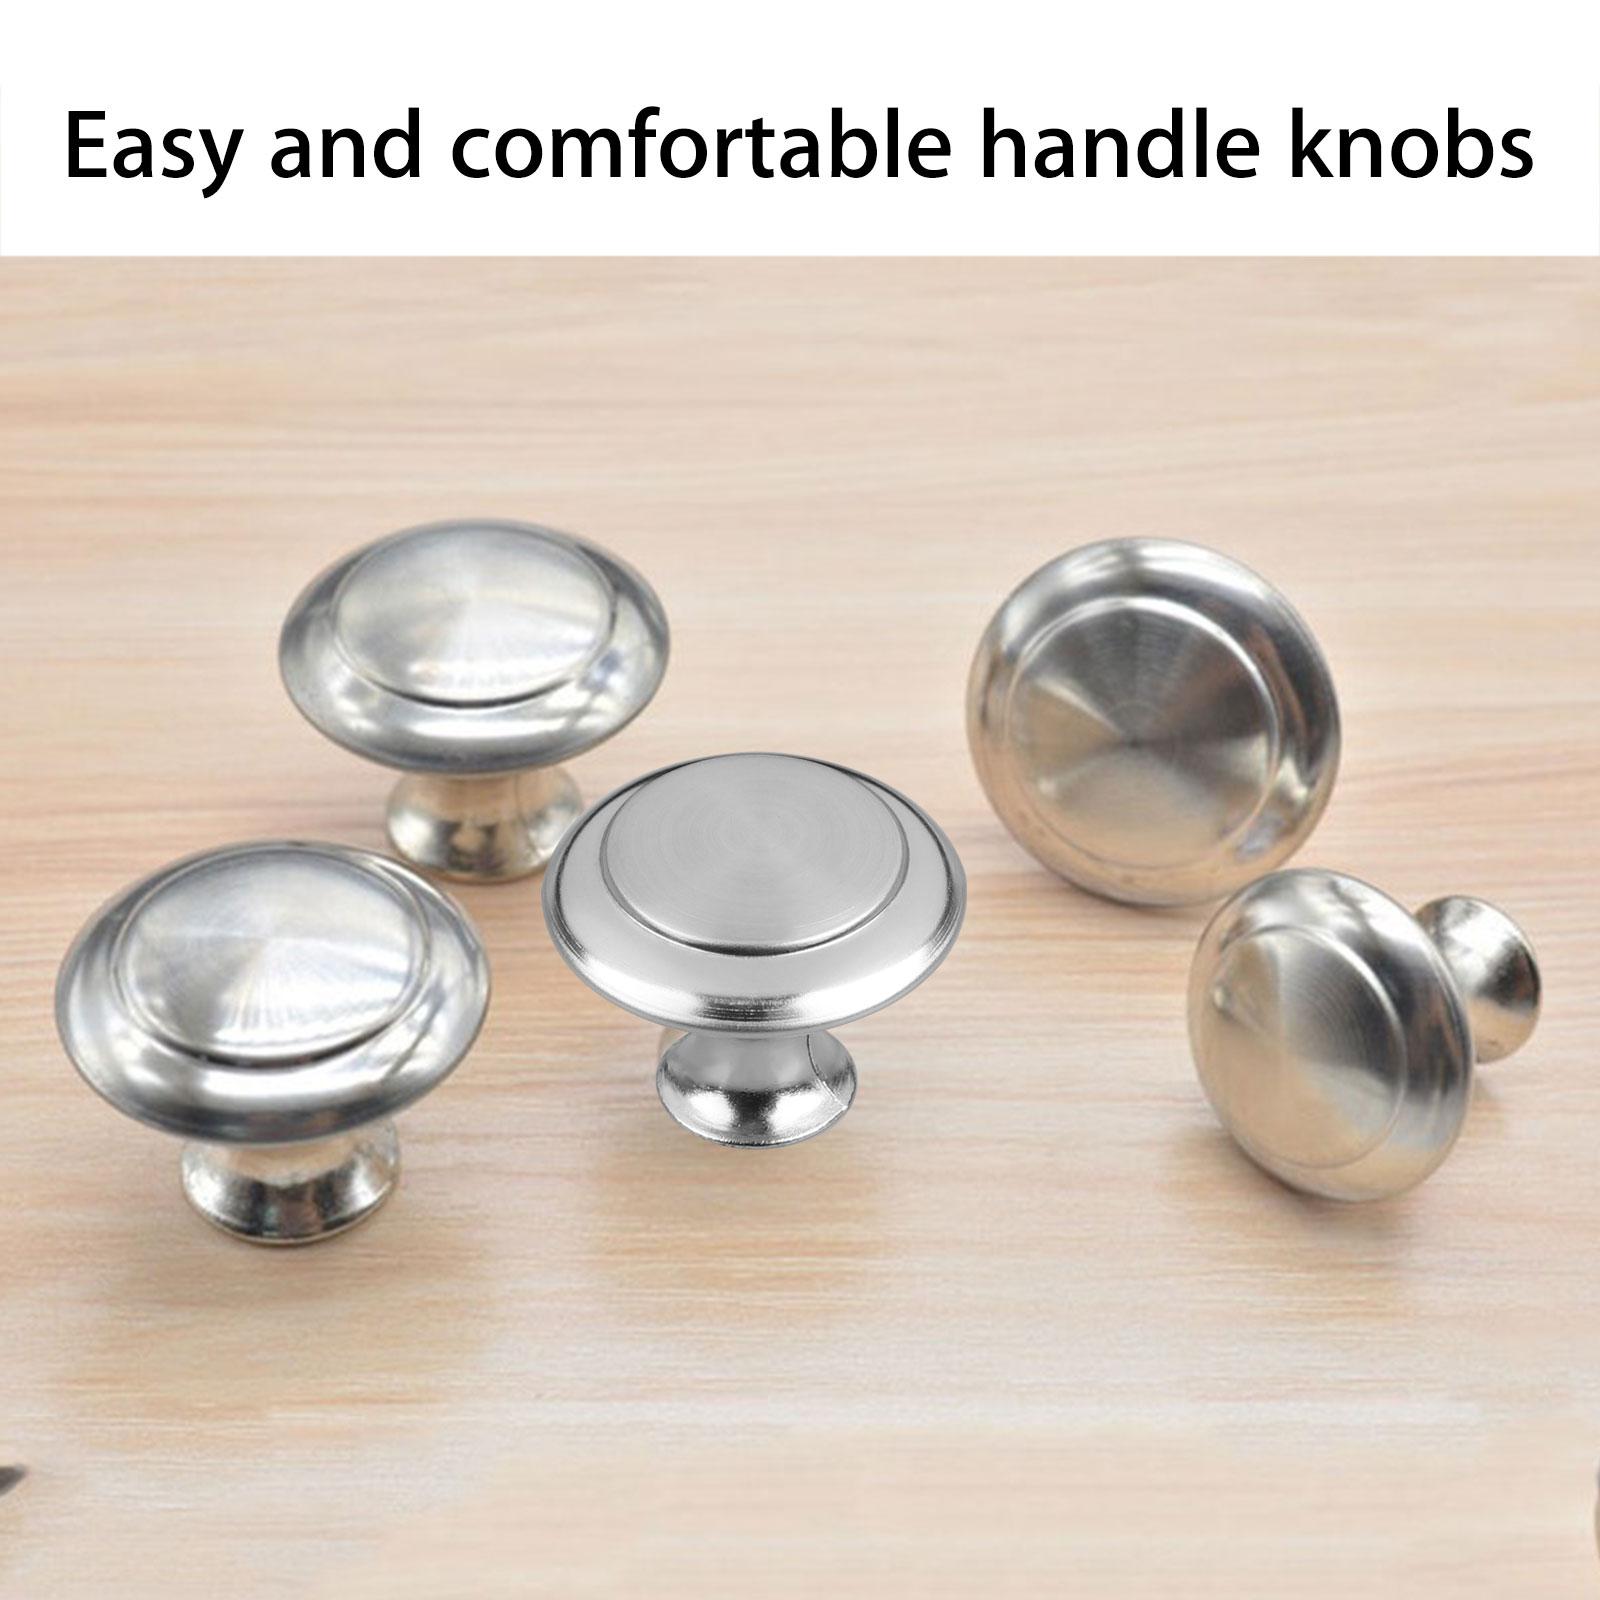 20pcs Kitchen Cabinet Heavy Pull Knobs, Brushed Nickel Cabinet Knobs Cupboard Door Knobs Kitchen Hardware Round Pull Knobs for Bathroom Drawer, Silver - image 4 of 8